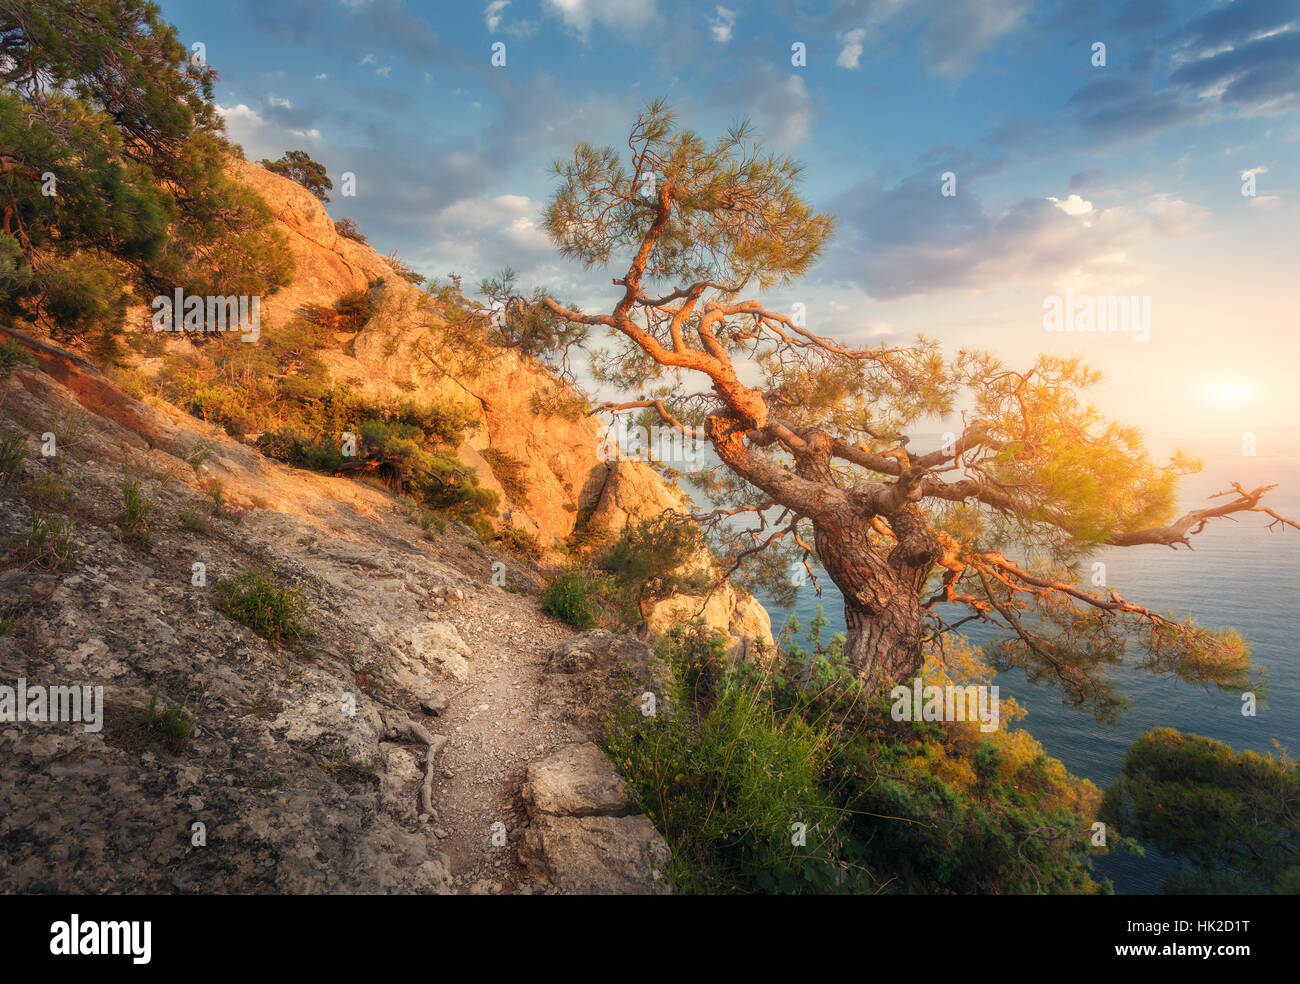 Tree on the mountain at sunrise. Colorful landscape with old tree, sea, trail, rocks and sunny sky with clouds. Summer forest Stock Photo